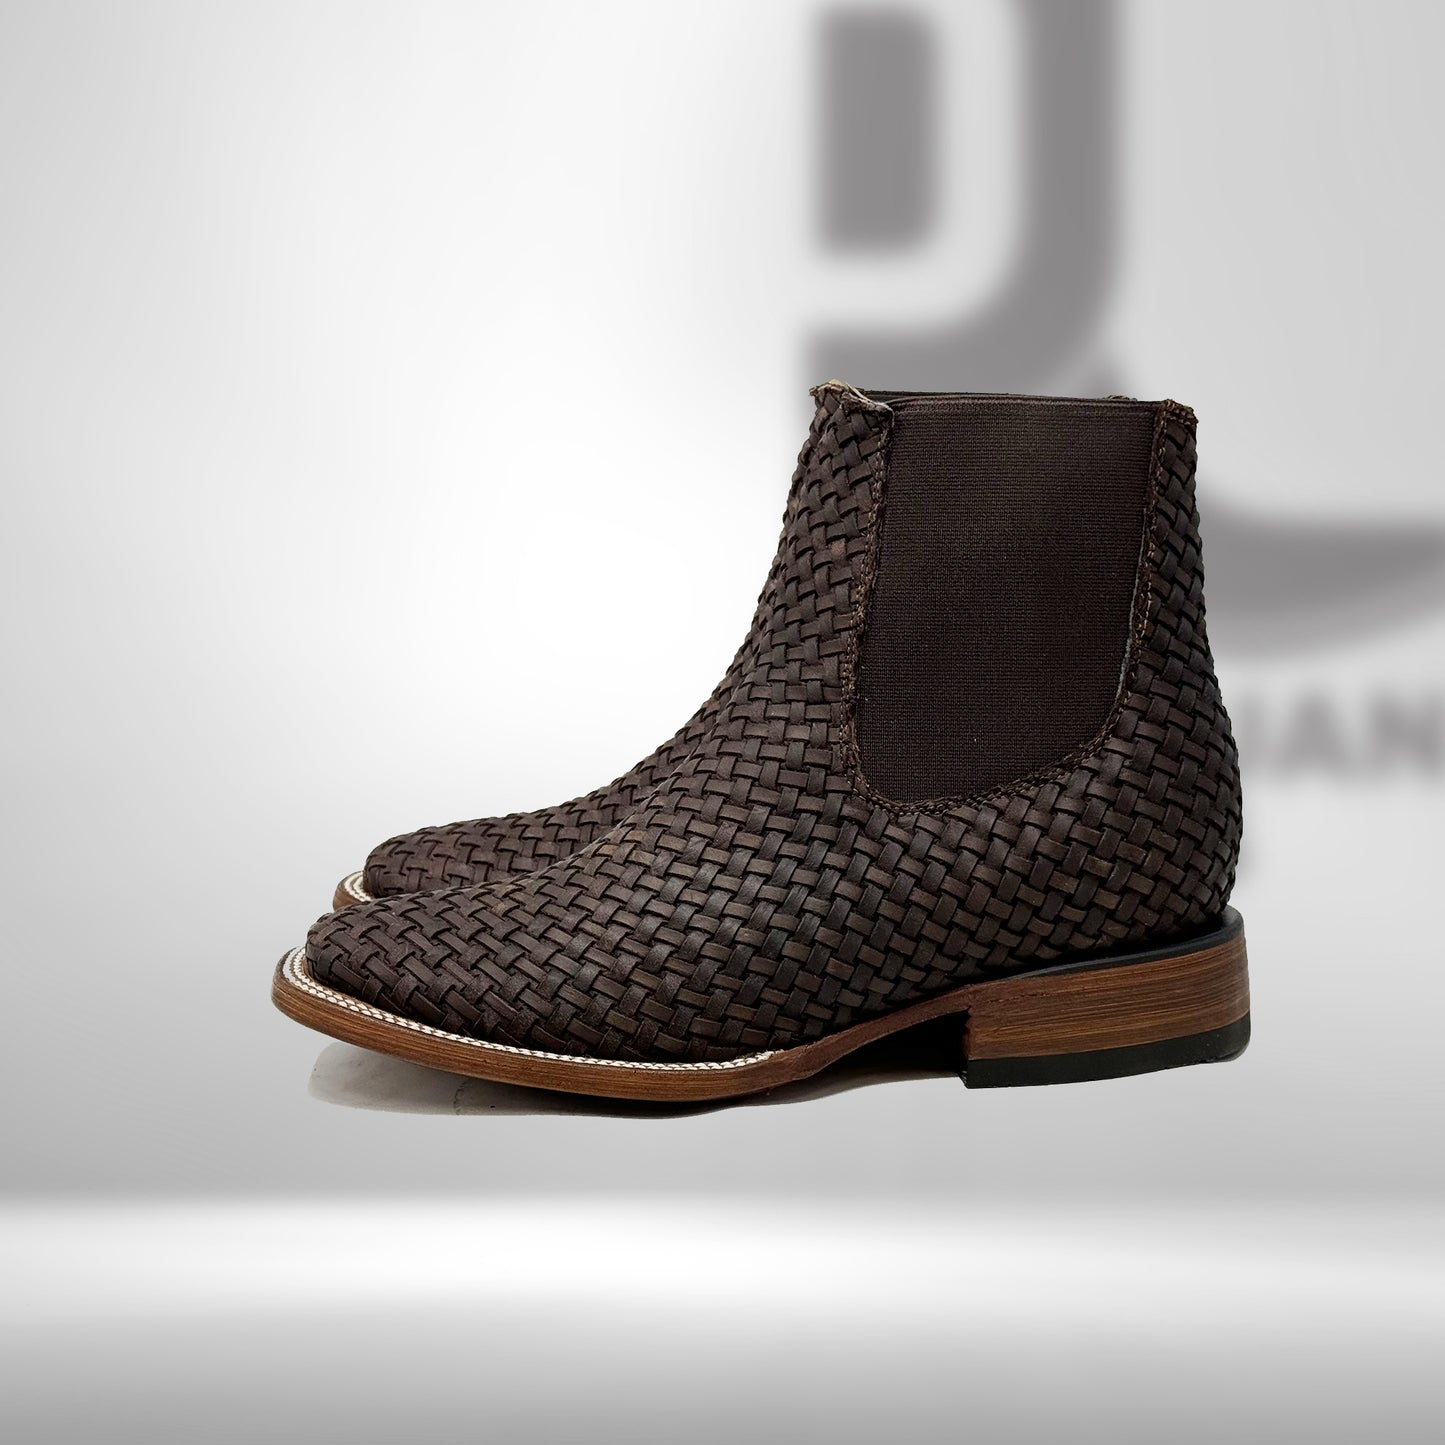 Brown Basket Weave Chelsea Boots H Toe